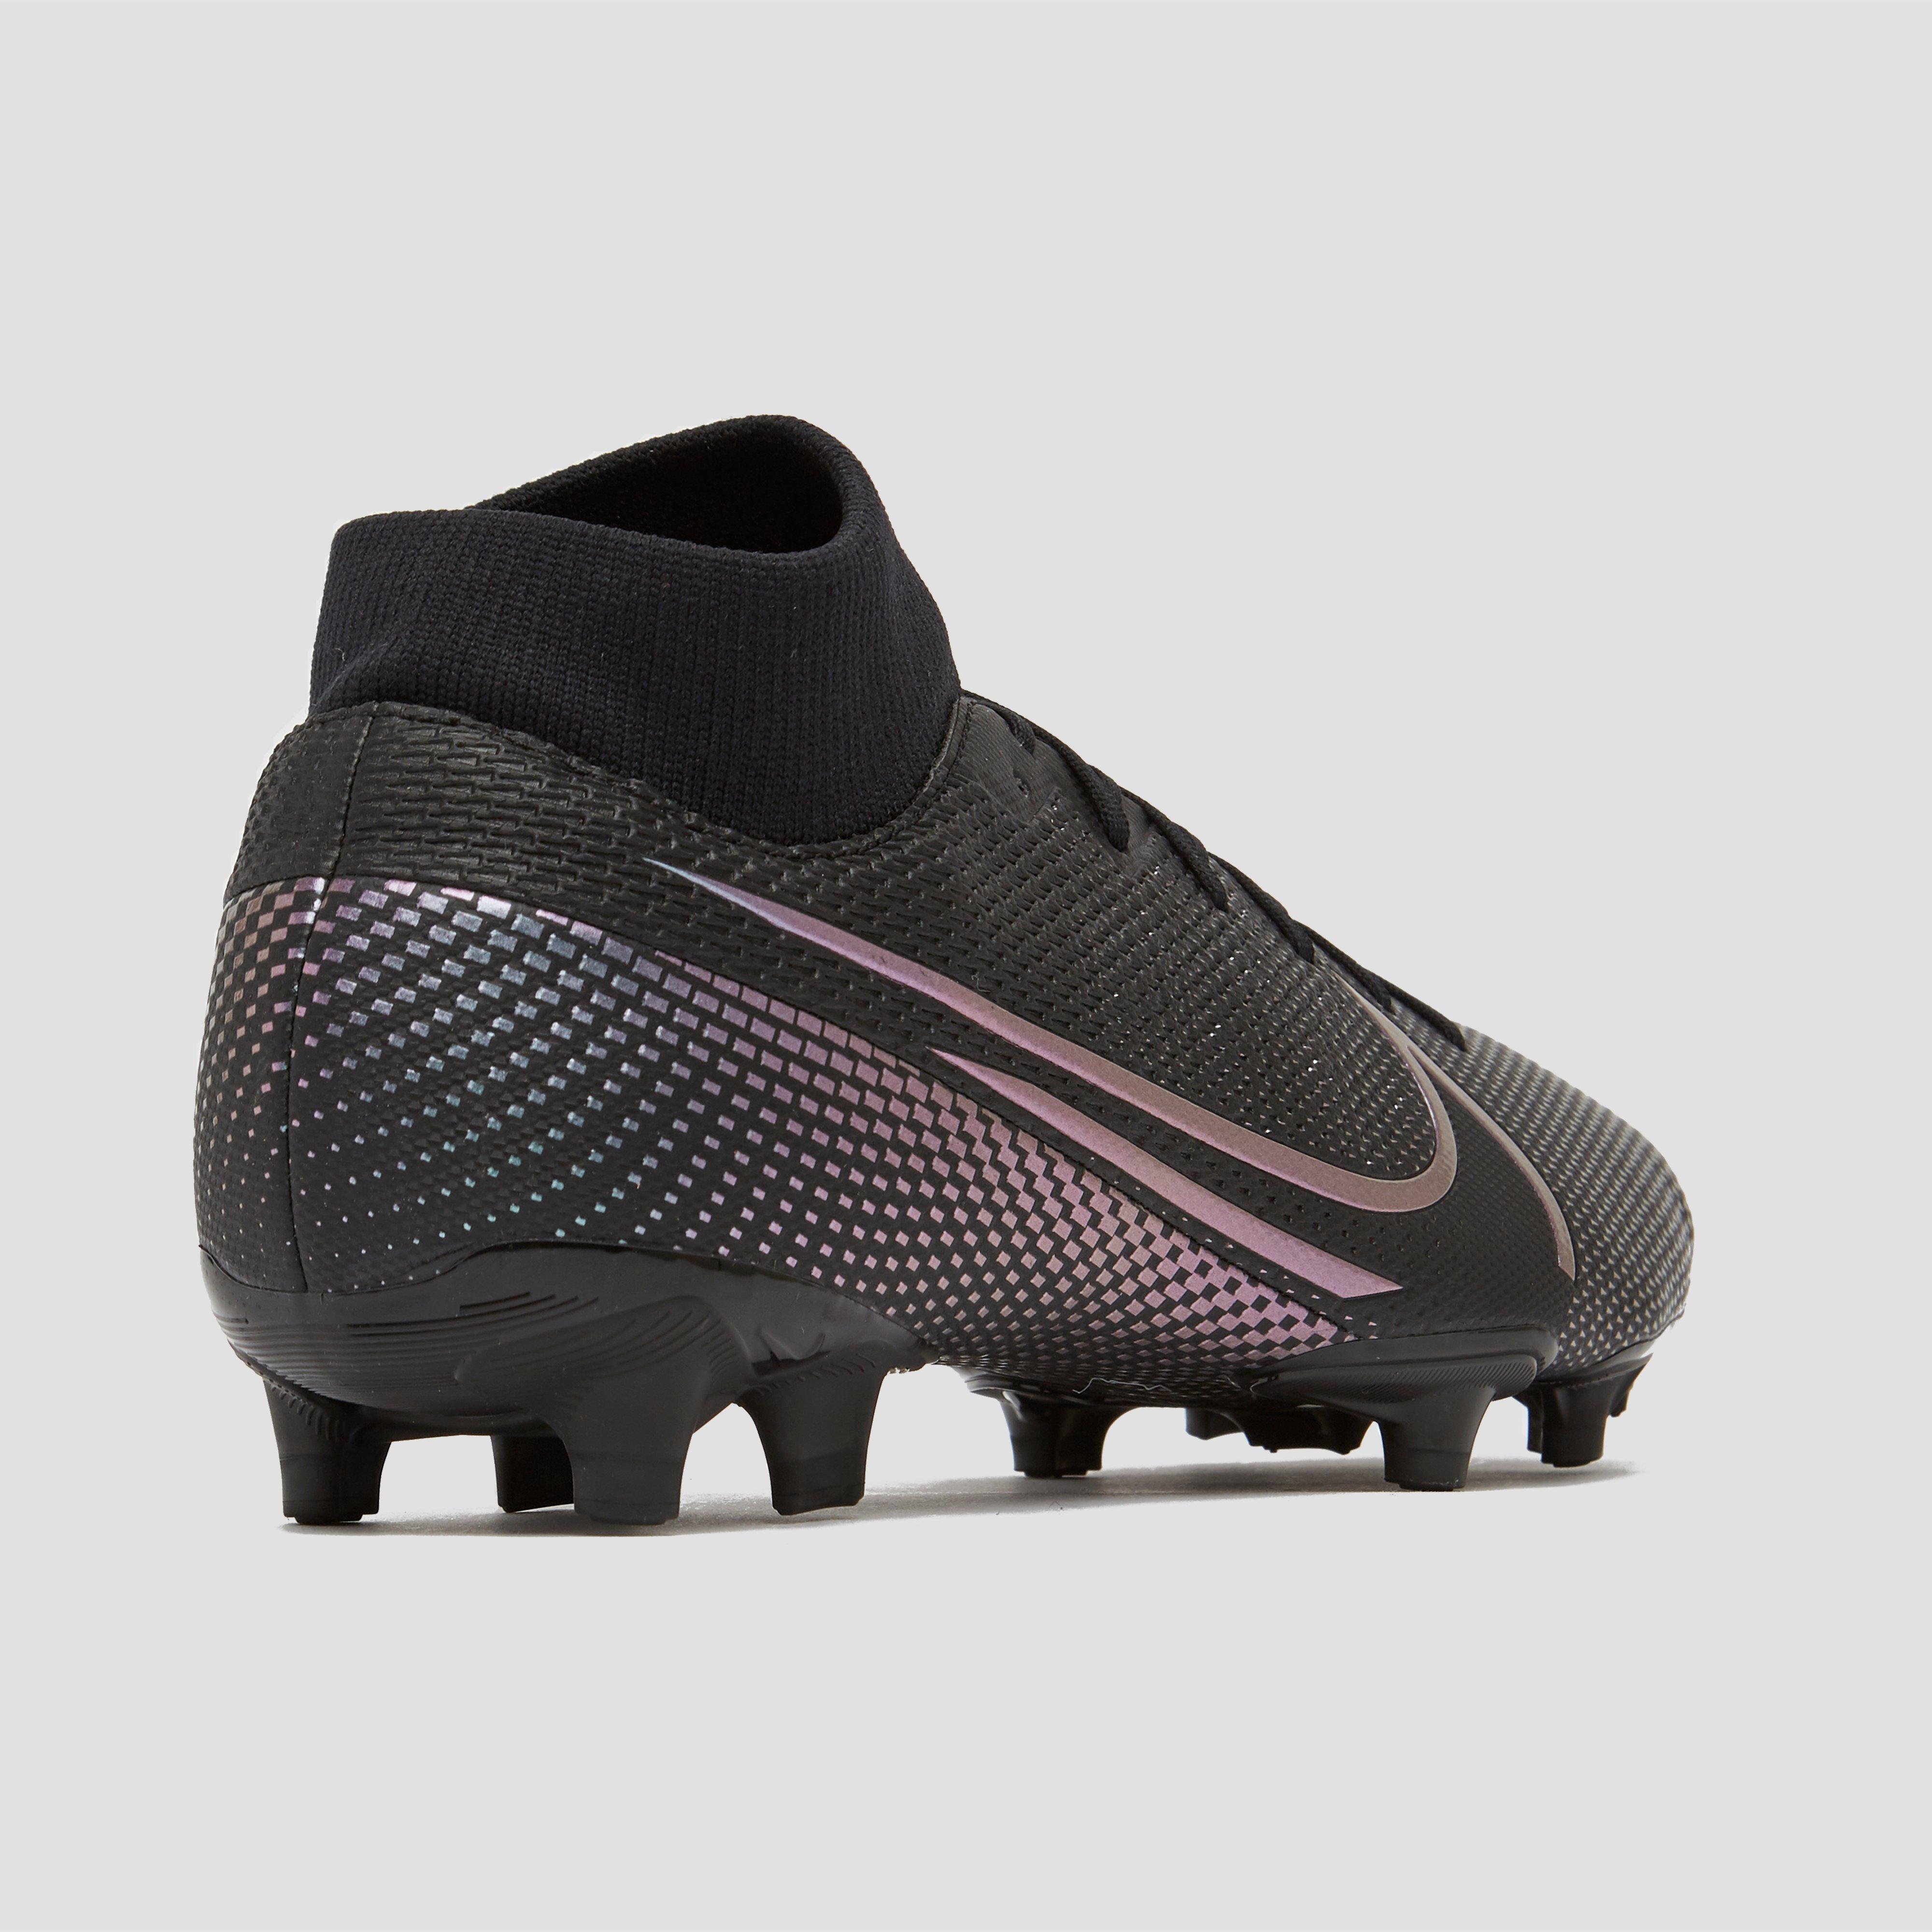 TESTED MERCURIAL SUPERFLY 7 ACADEMY TF SOCIETY